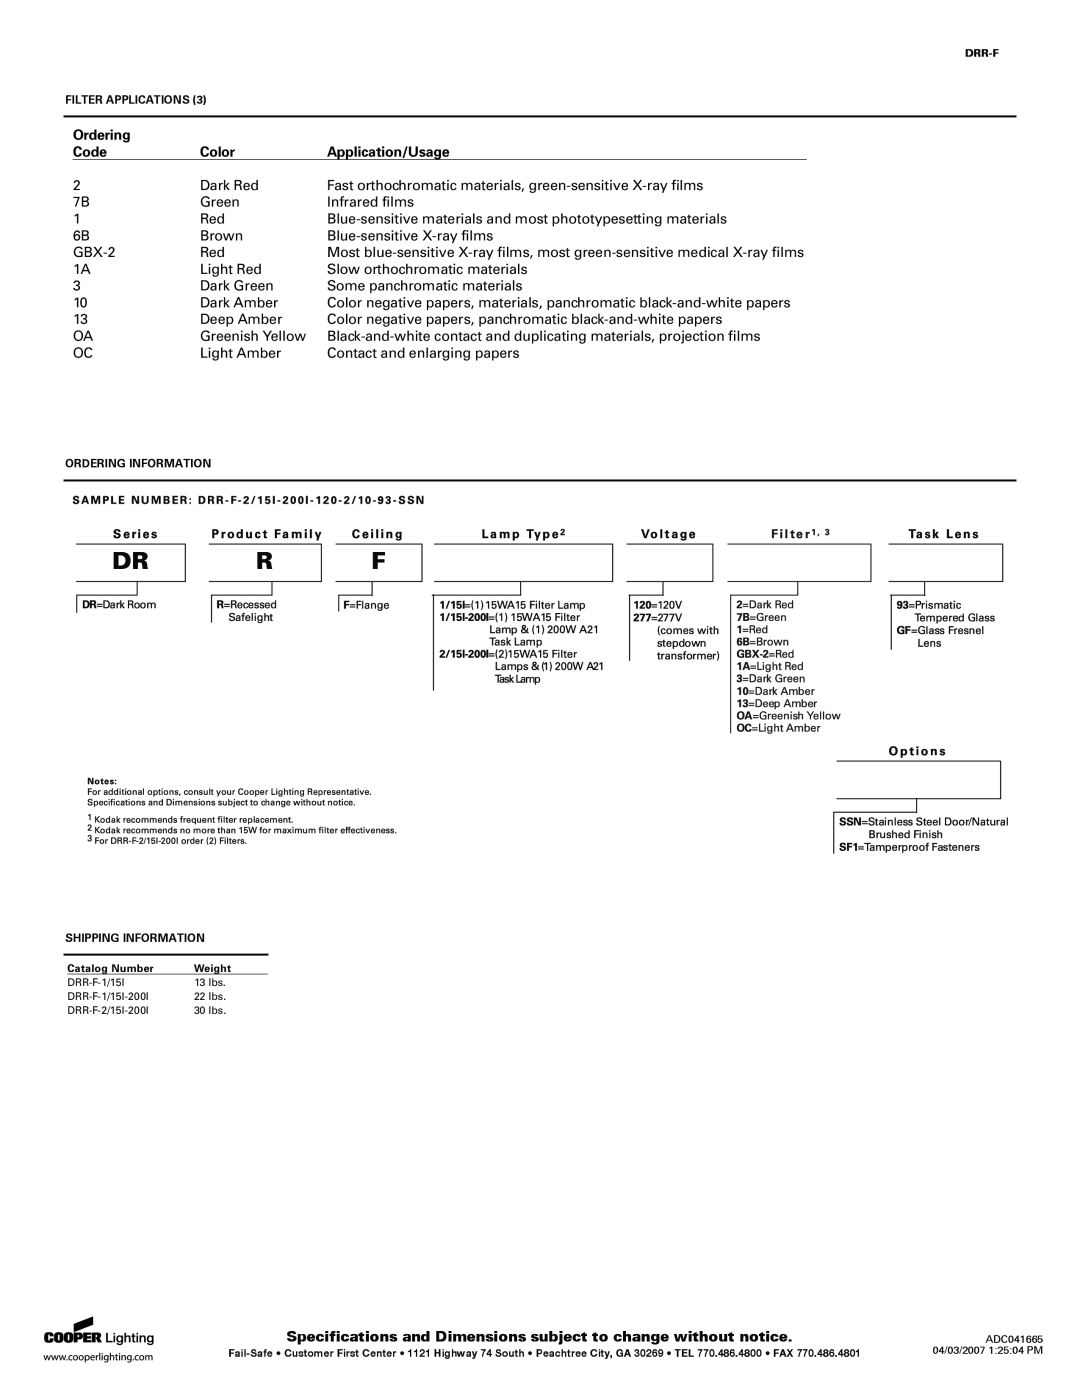 Cooper Lighting DRR-F specifications Ordering, Code, Color, Application/Usage 